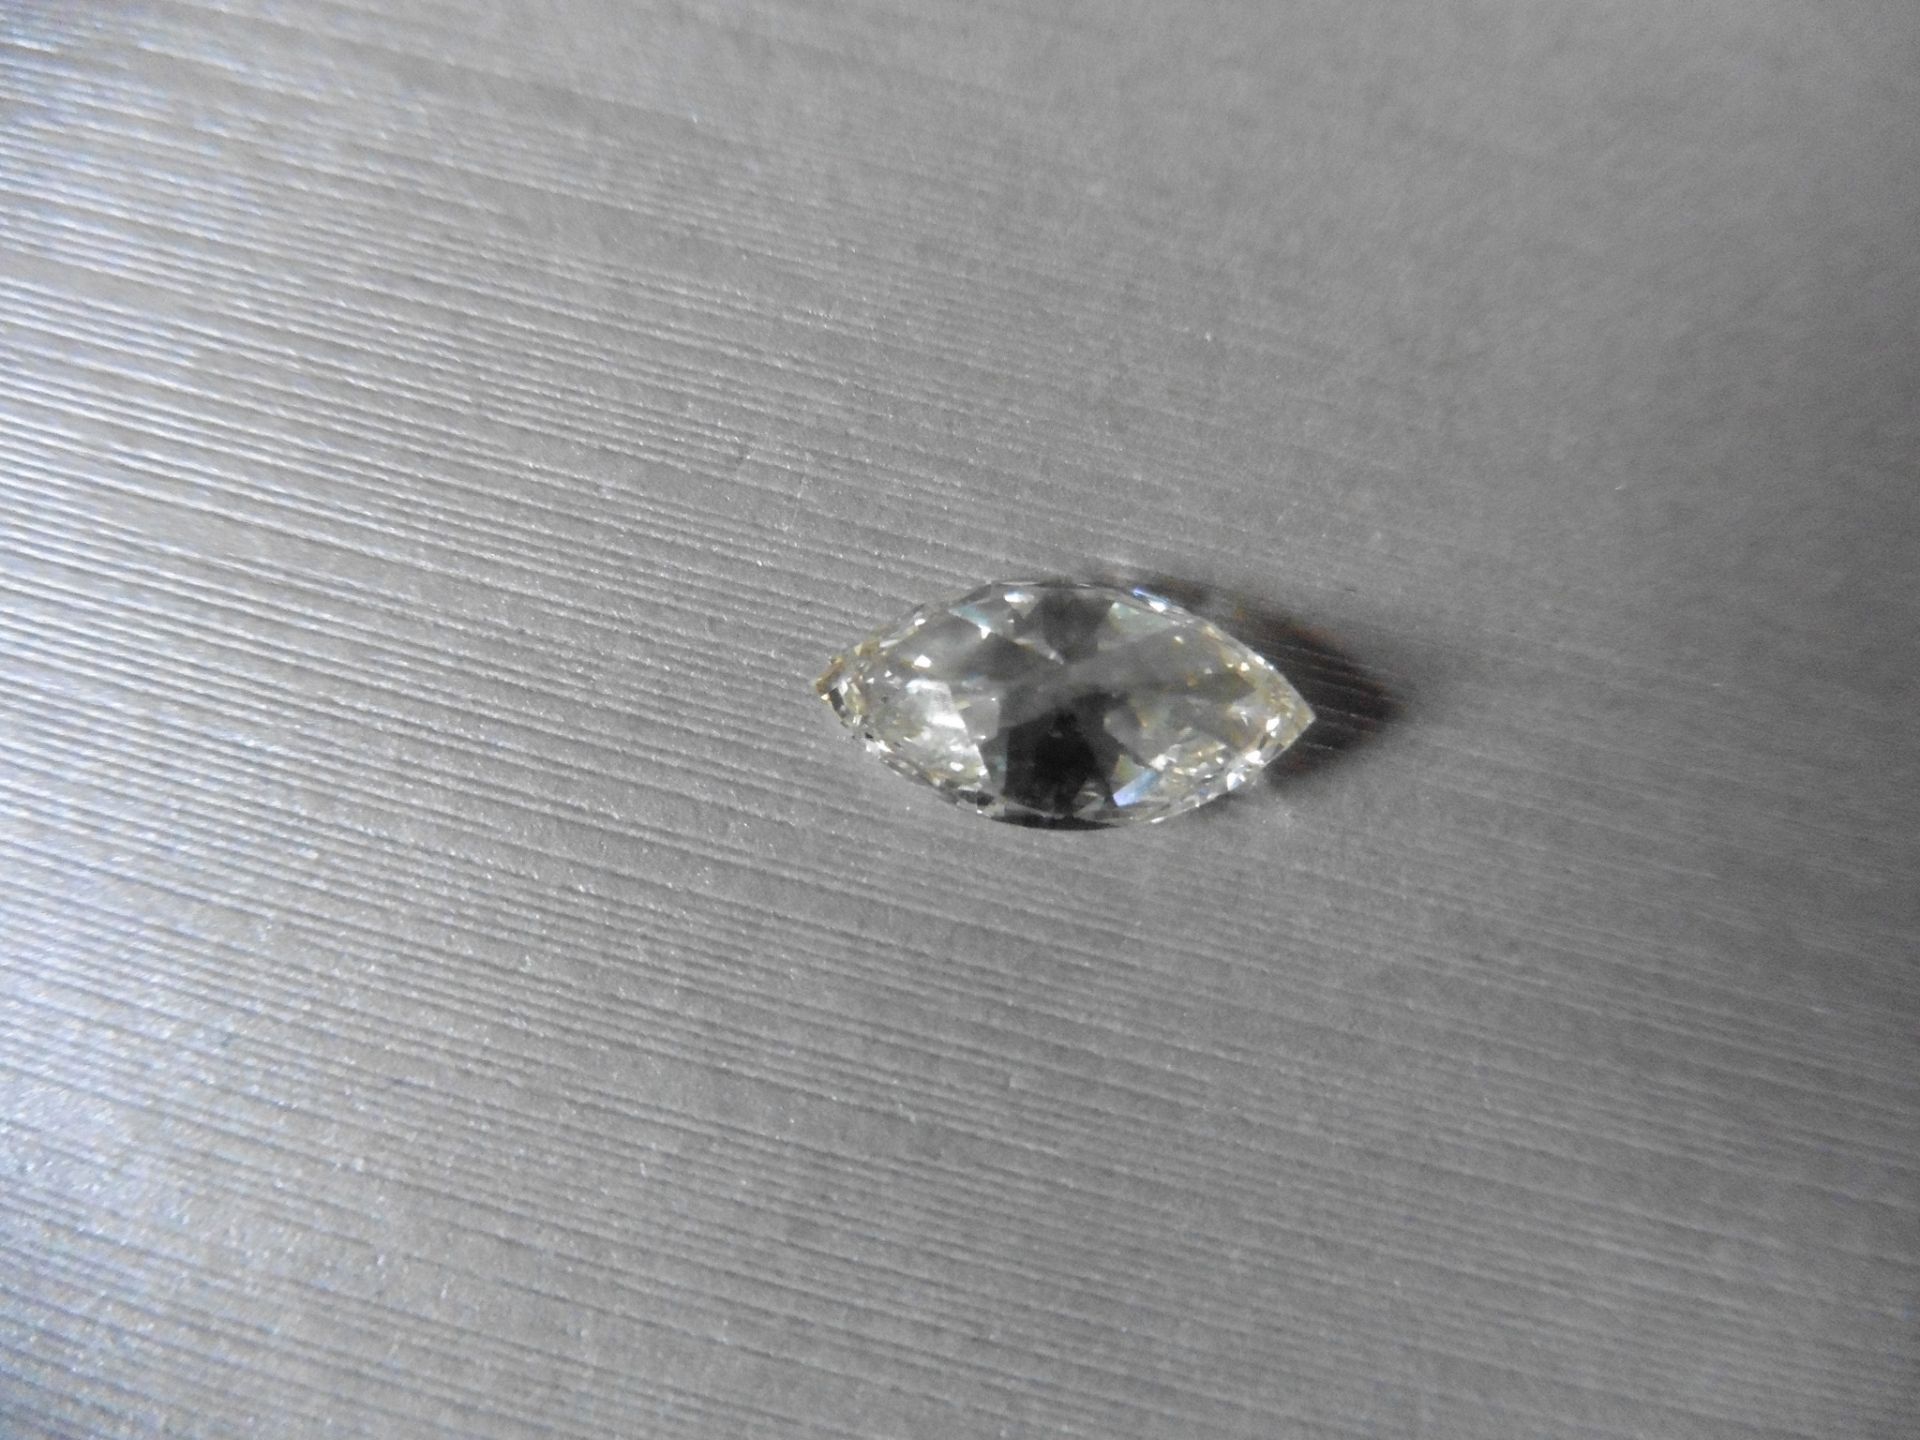 2.35ct marquise cut diamond. Colour, VS clarity. Measures 12.89 x 6.62 x 4.09mm. - Image 5 of 5